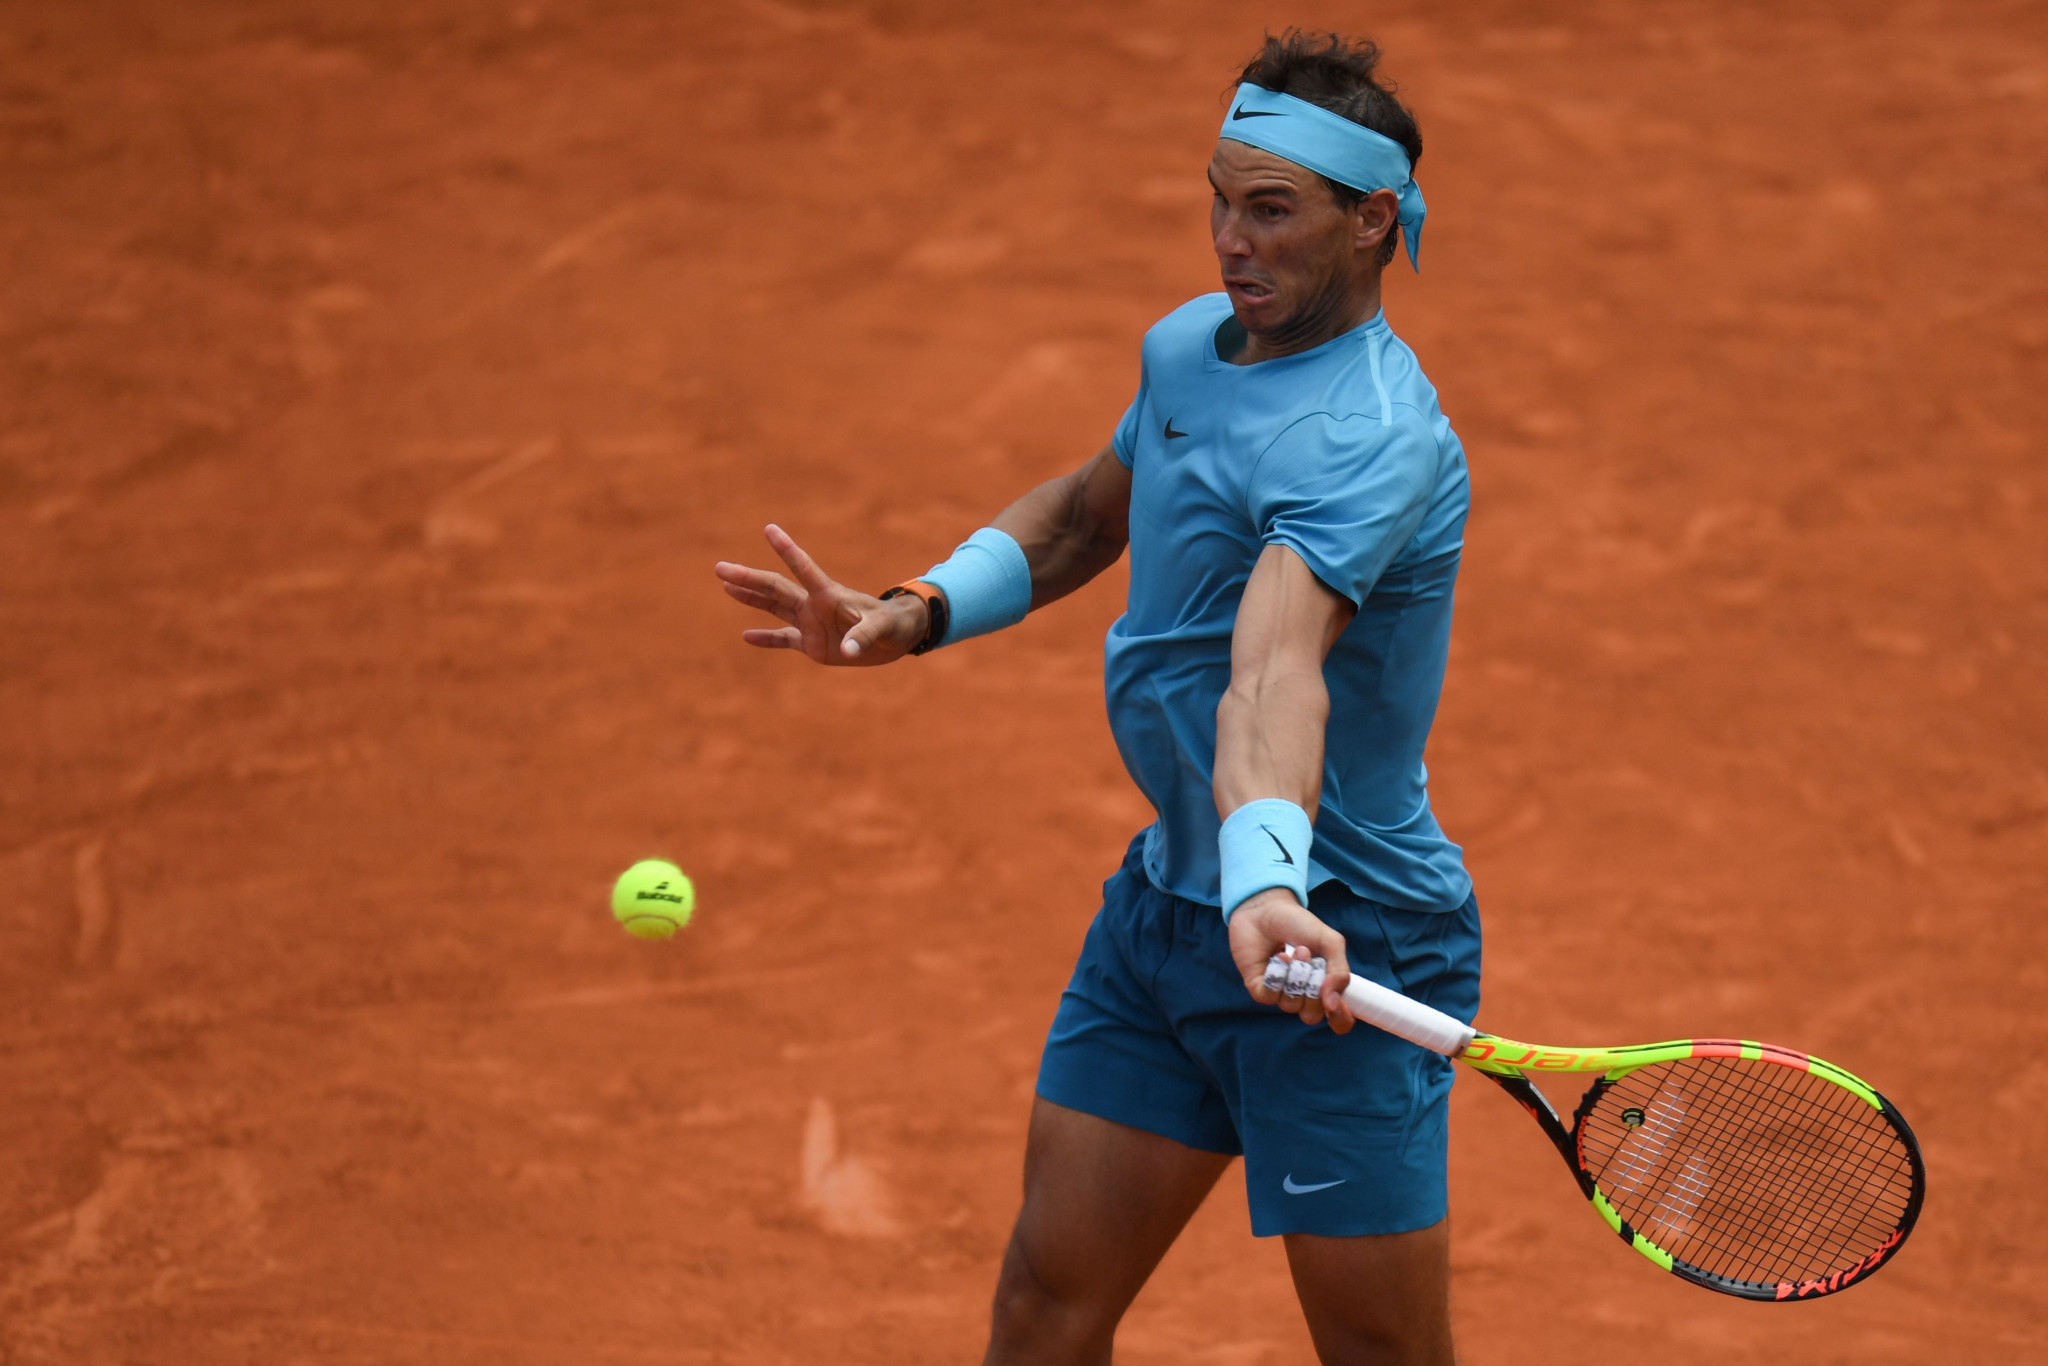 Nadal reaches quarter-finals as Williams withdraws through injury at French Open